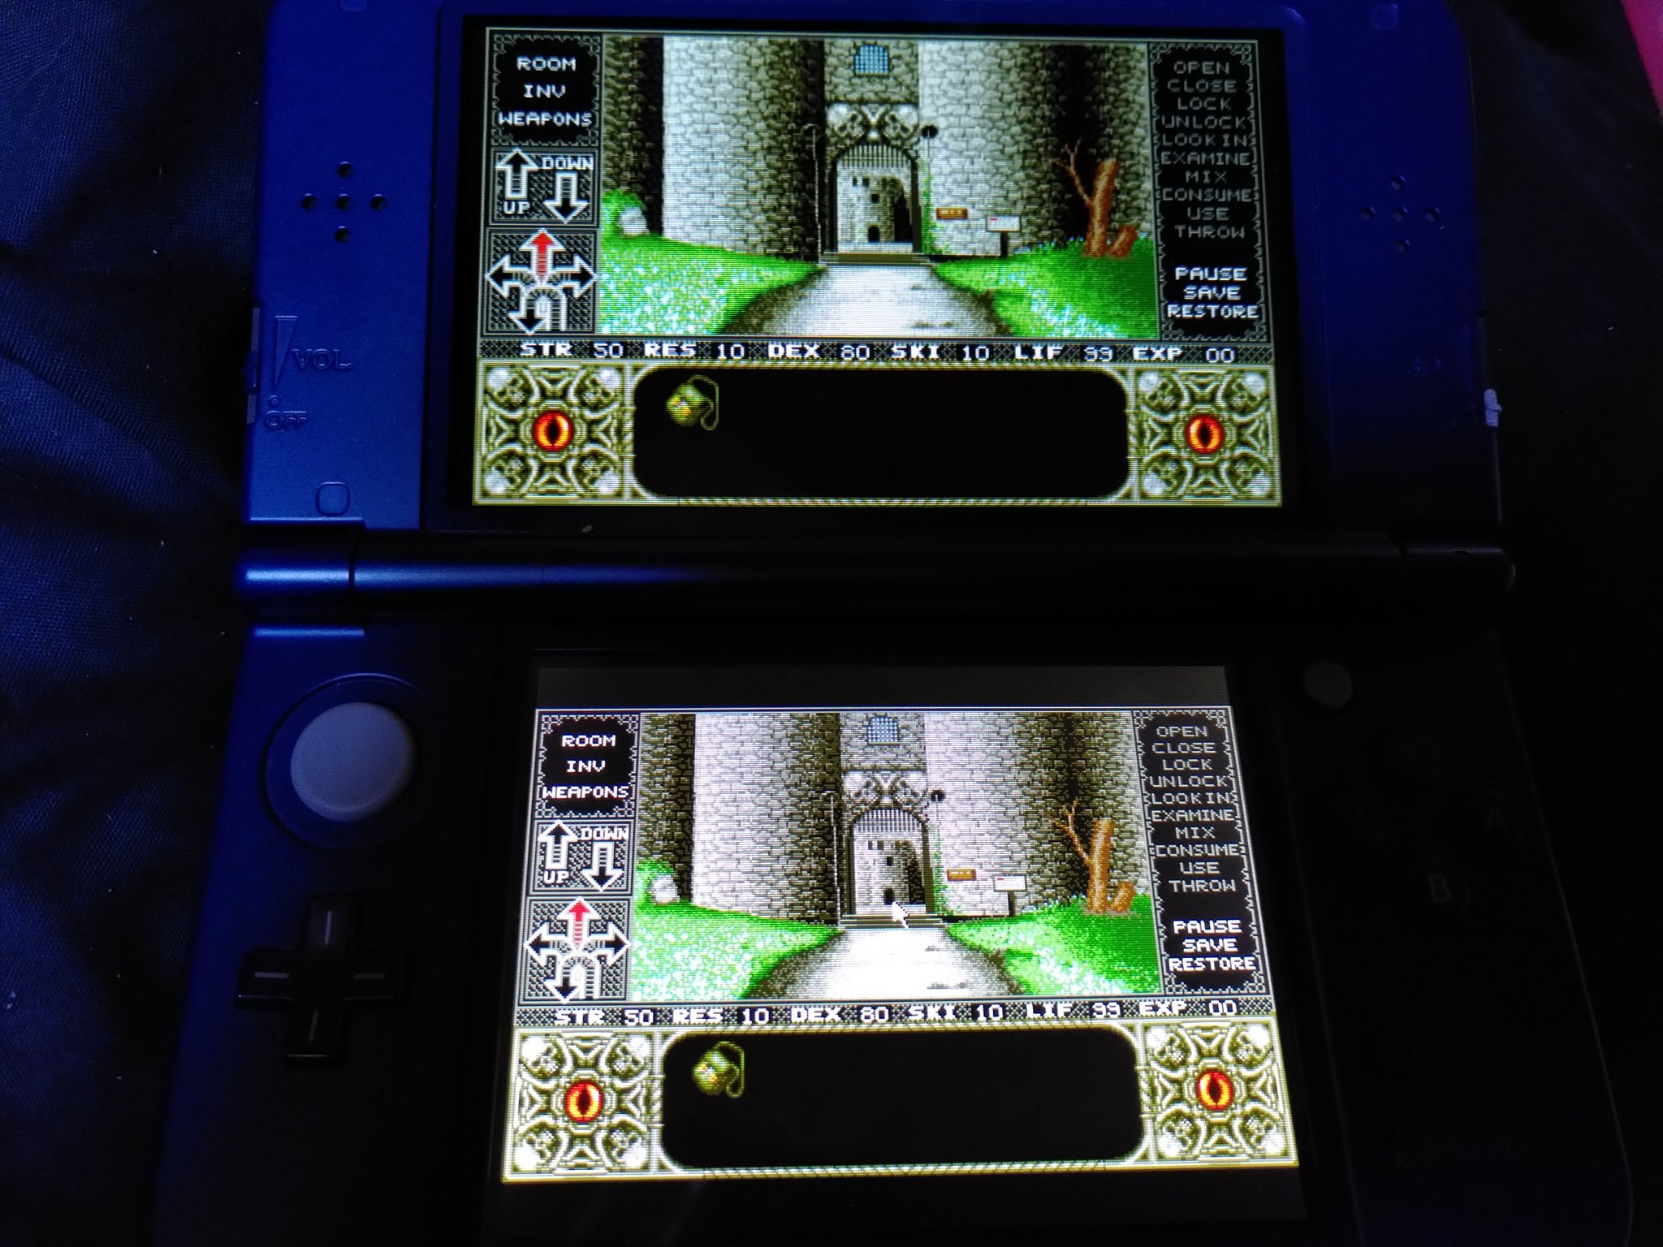 The gates of a formitable castle in a first person with navigation, inventory and interaction icons along the sides and bottom of the viewport.